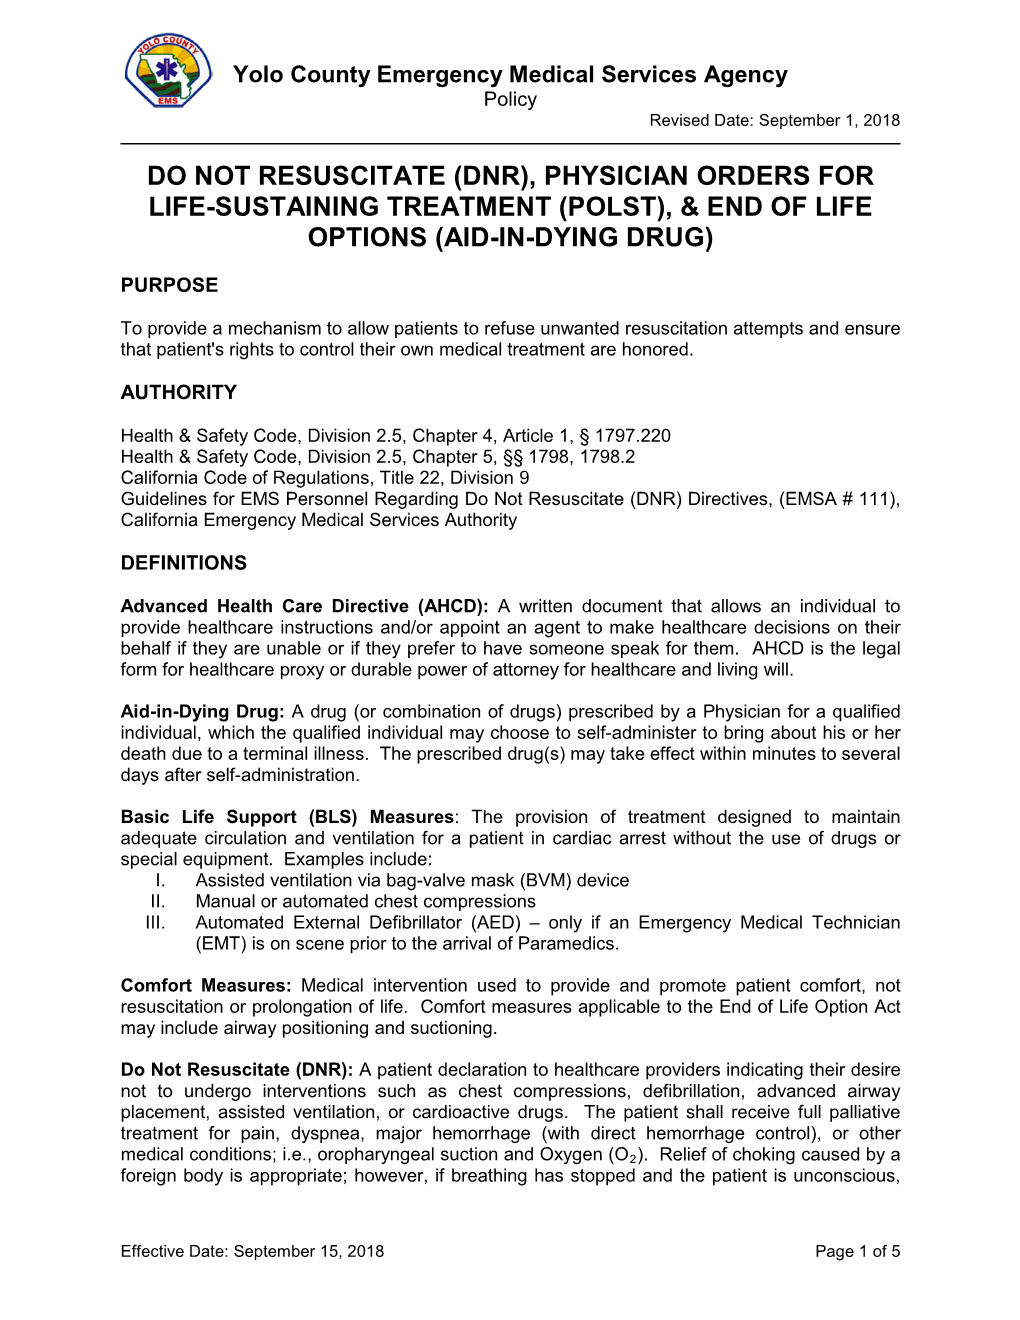 Do Not Resuscitate (Dnr), Physician Orders for Life-Sustaining Treatment (Polst), & End of Life Options (Aid-In-Dying Drug)